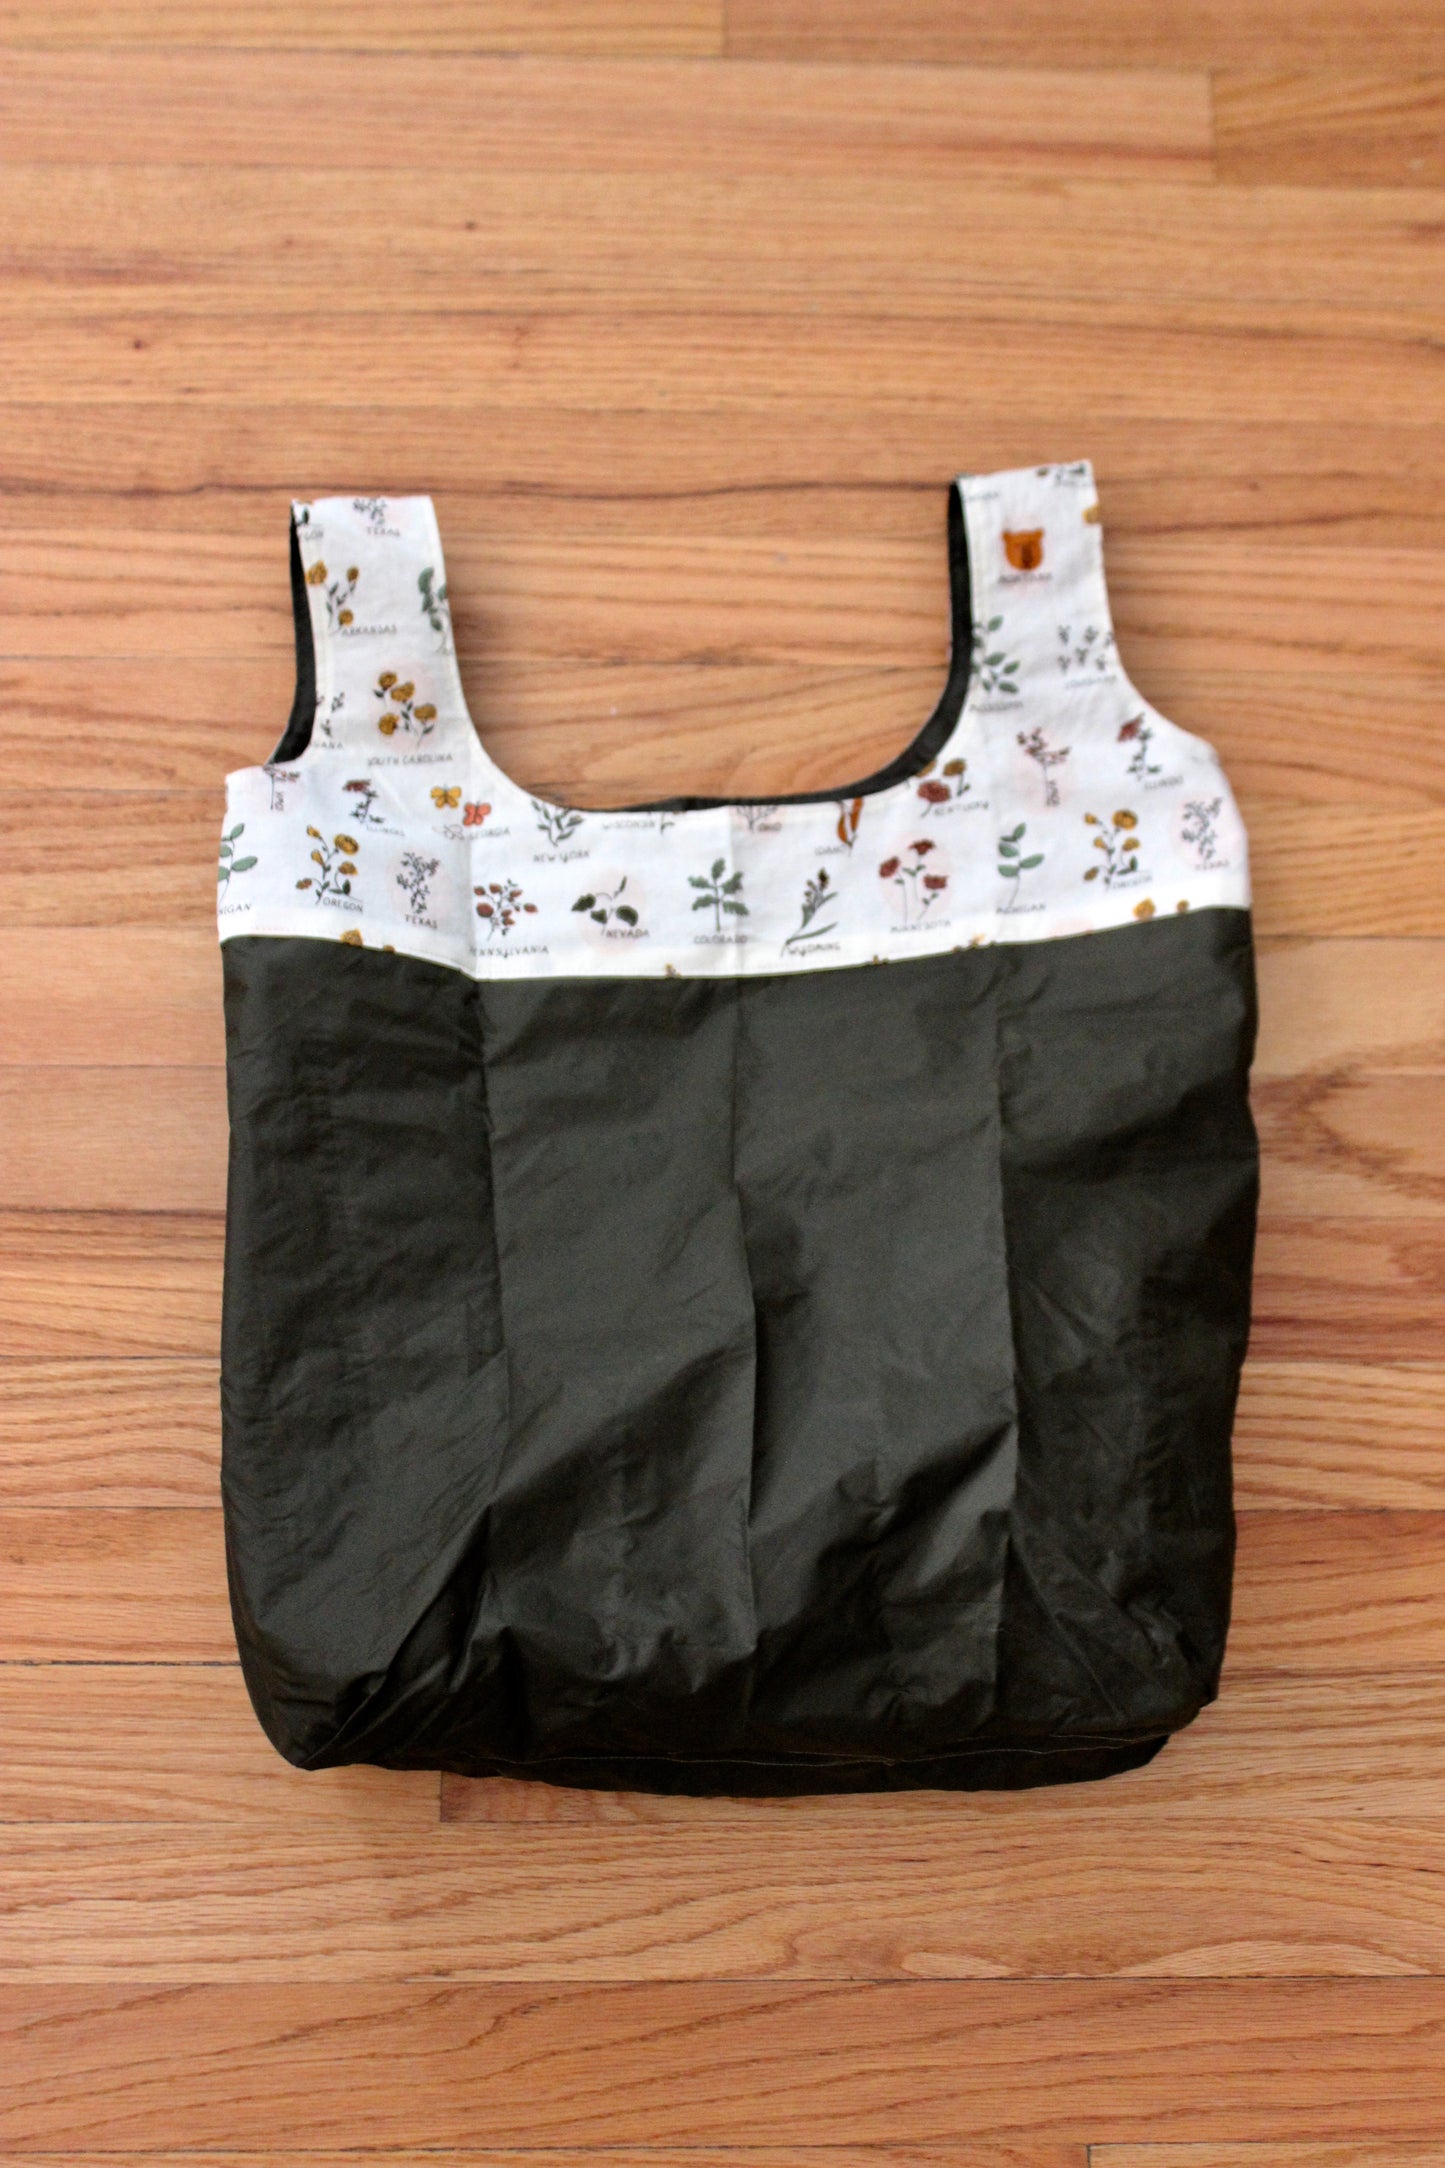 Shopping bag made from recycled tent